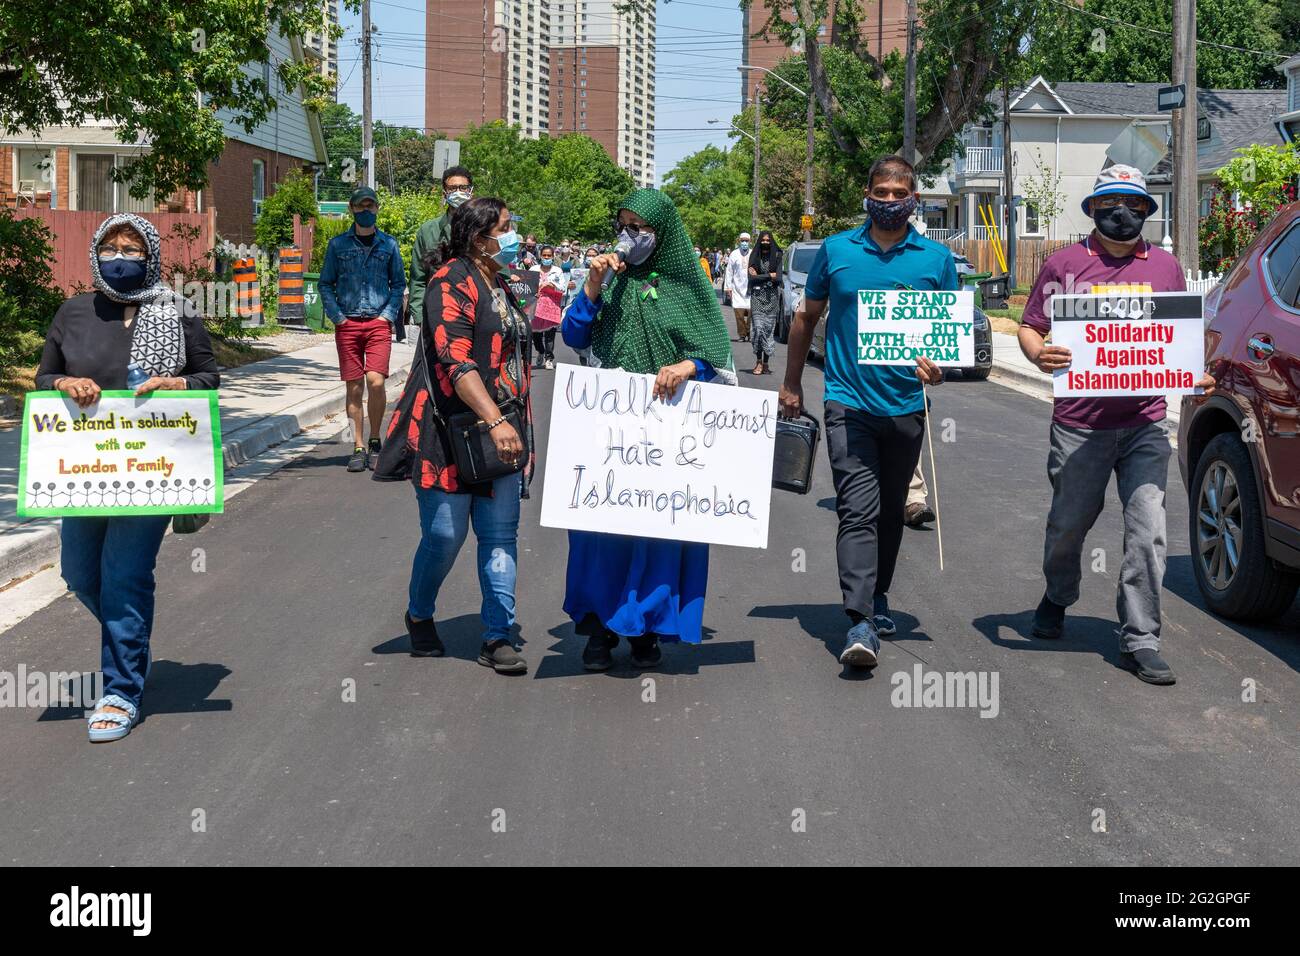 Toronto, Canada-June 11, 2021: A walk against hate was held in the Danforth district in solidarity with the family killed in London, Ontario earlier t Stock Photo